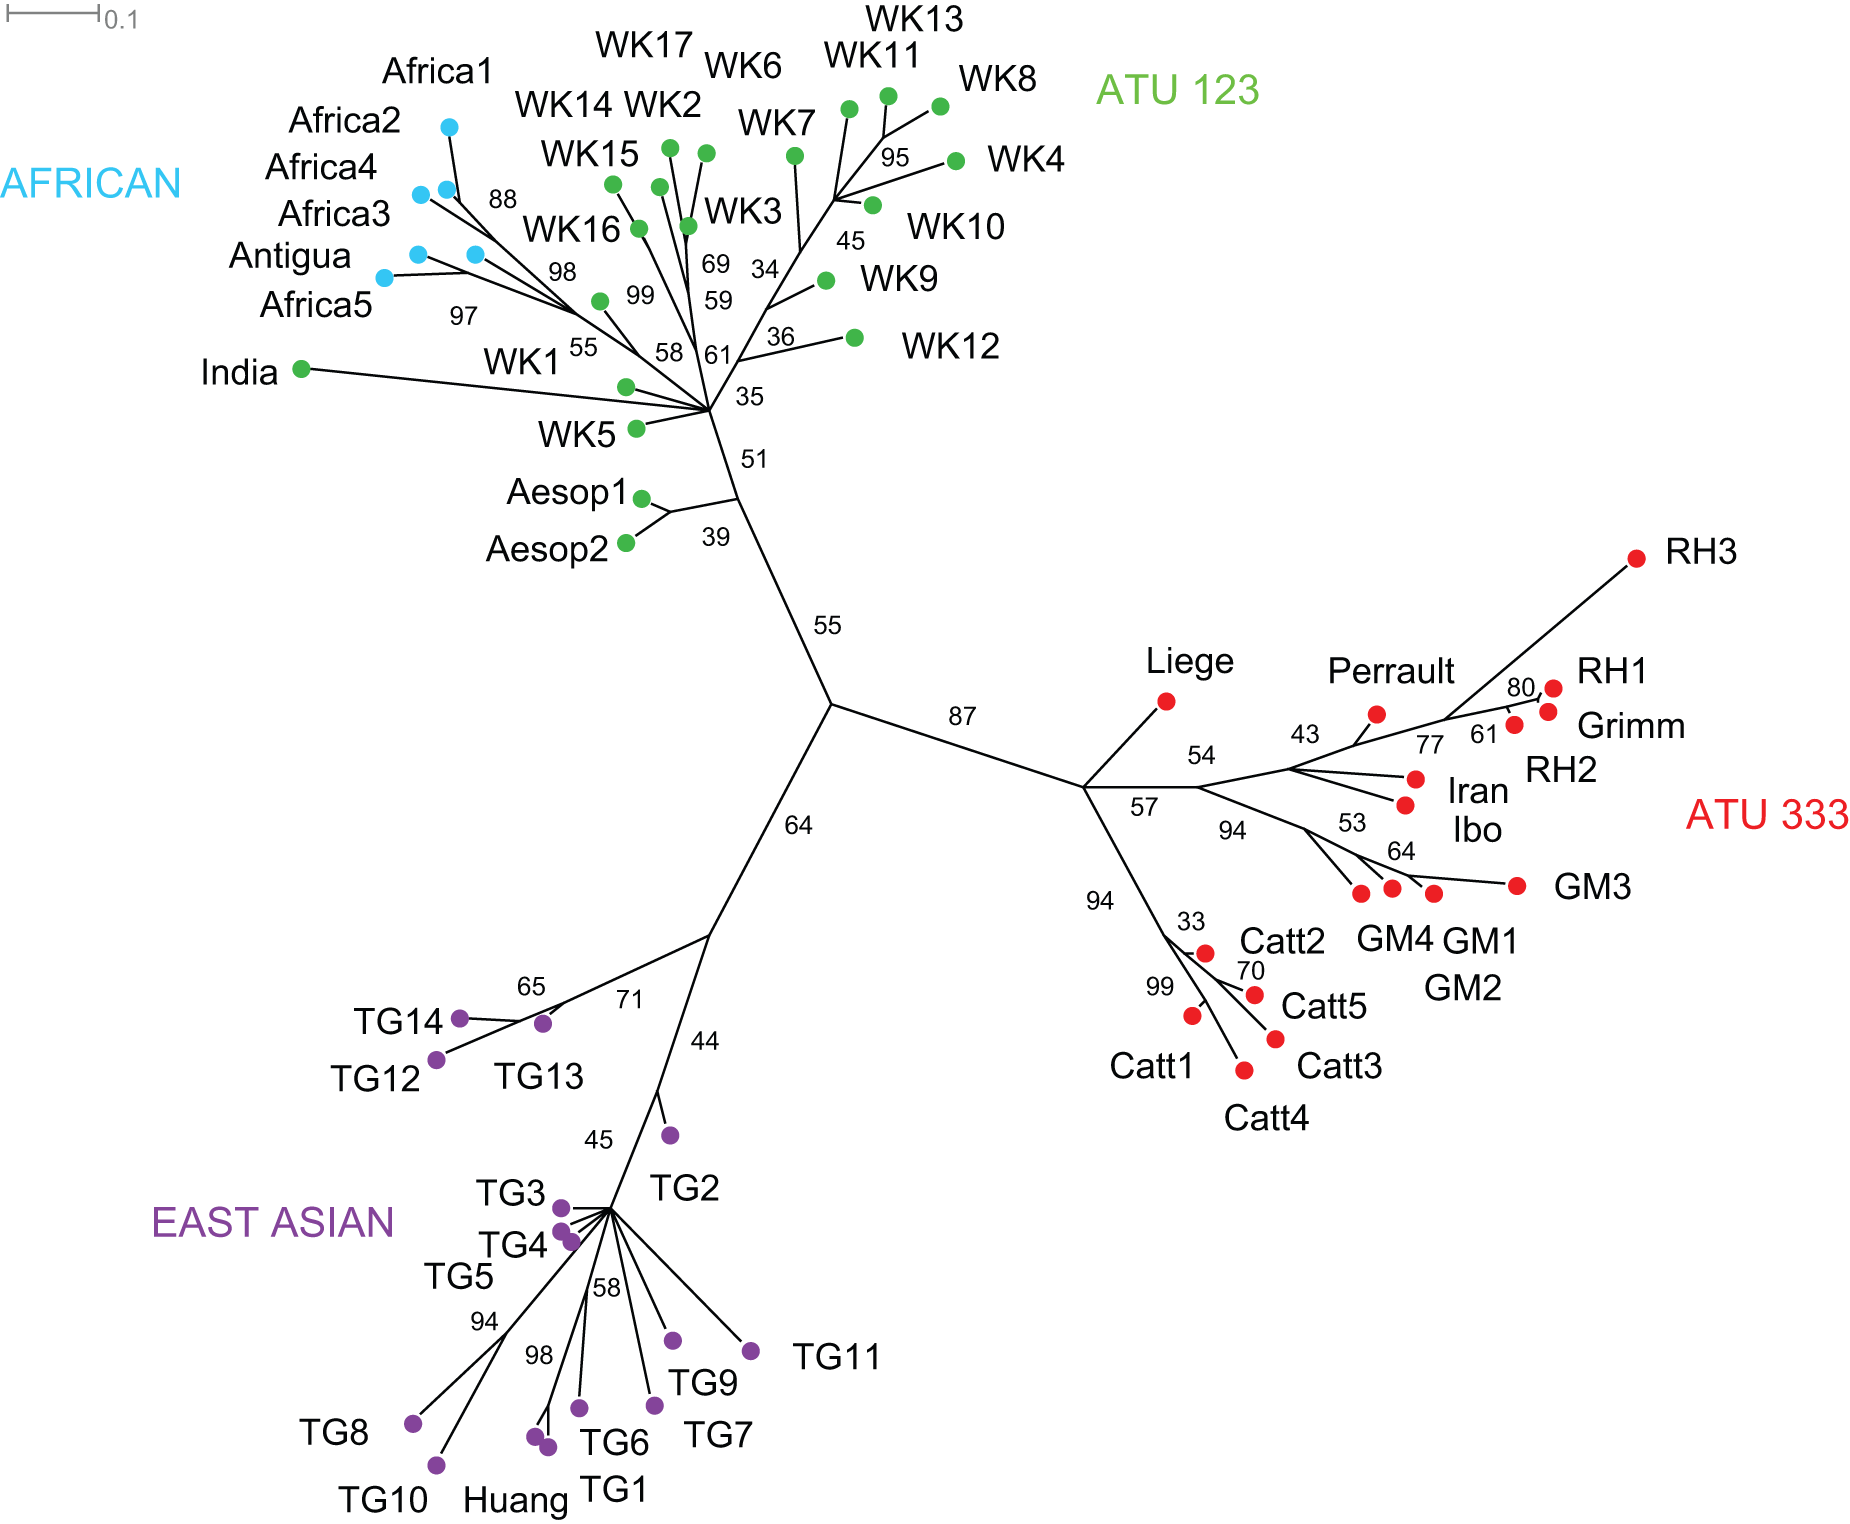 Fig. 4.7: Tree returned by the phylogenetic analysis of ATU 123 and 333